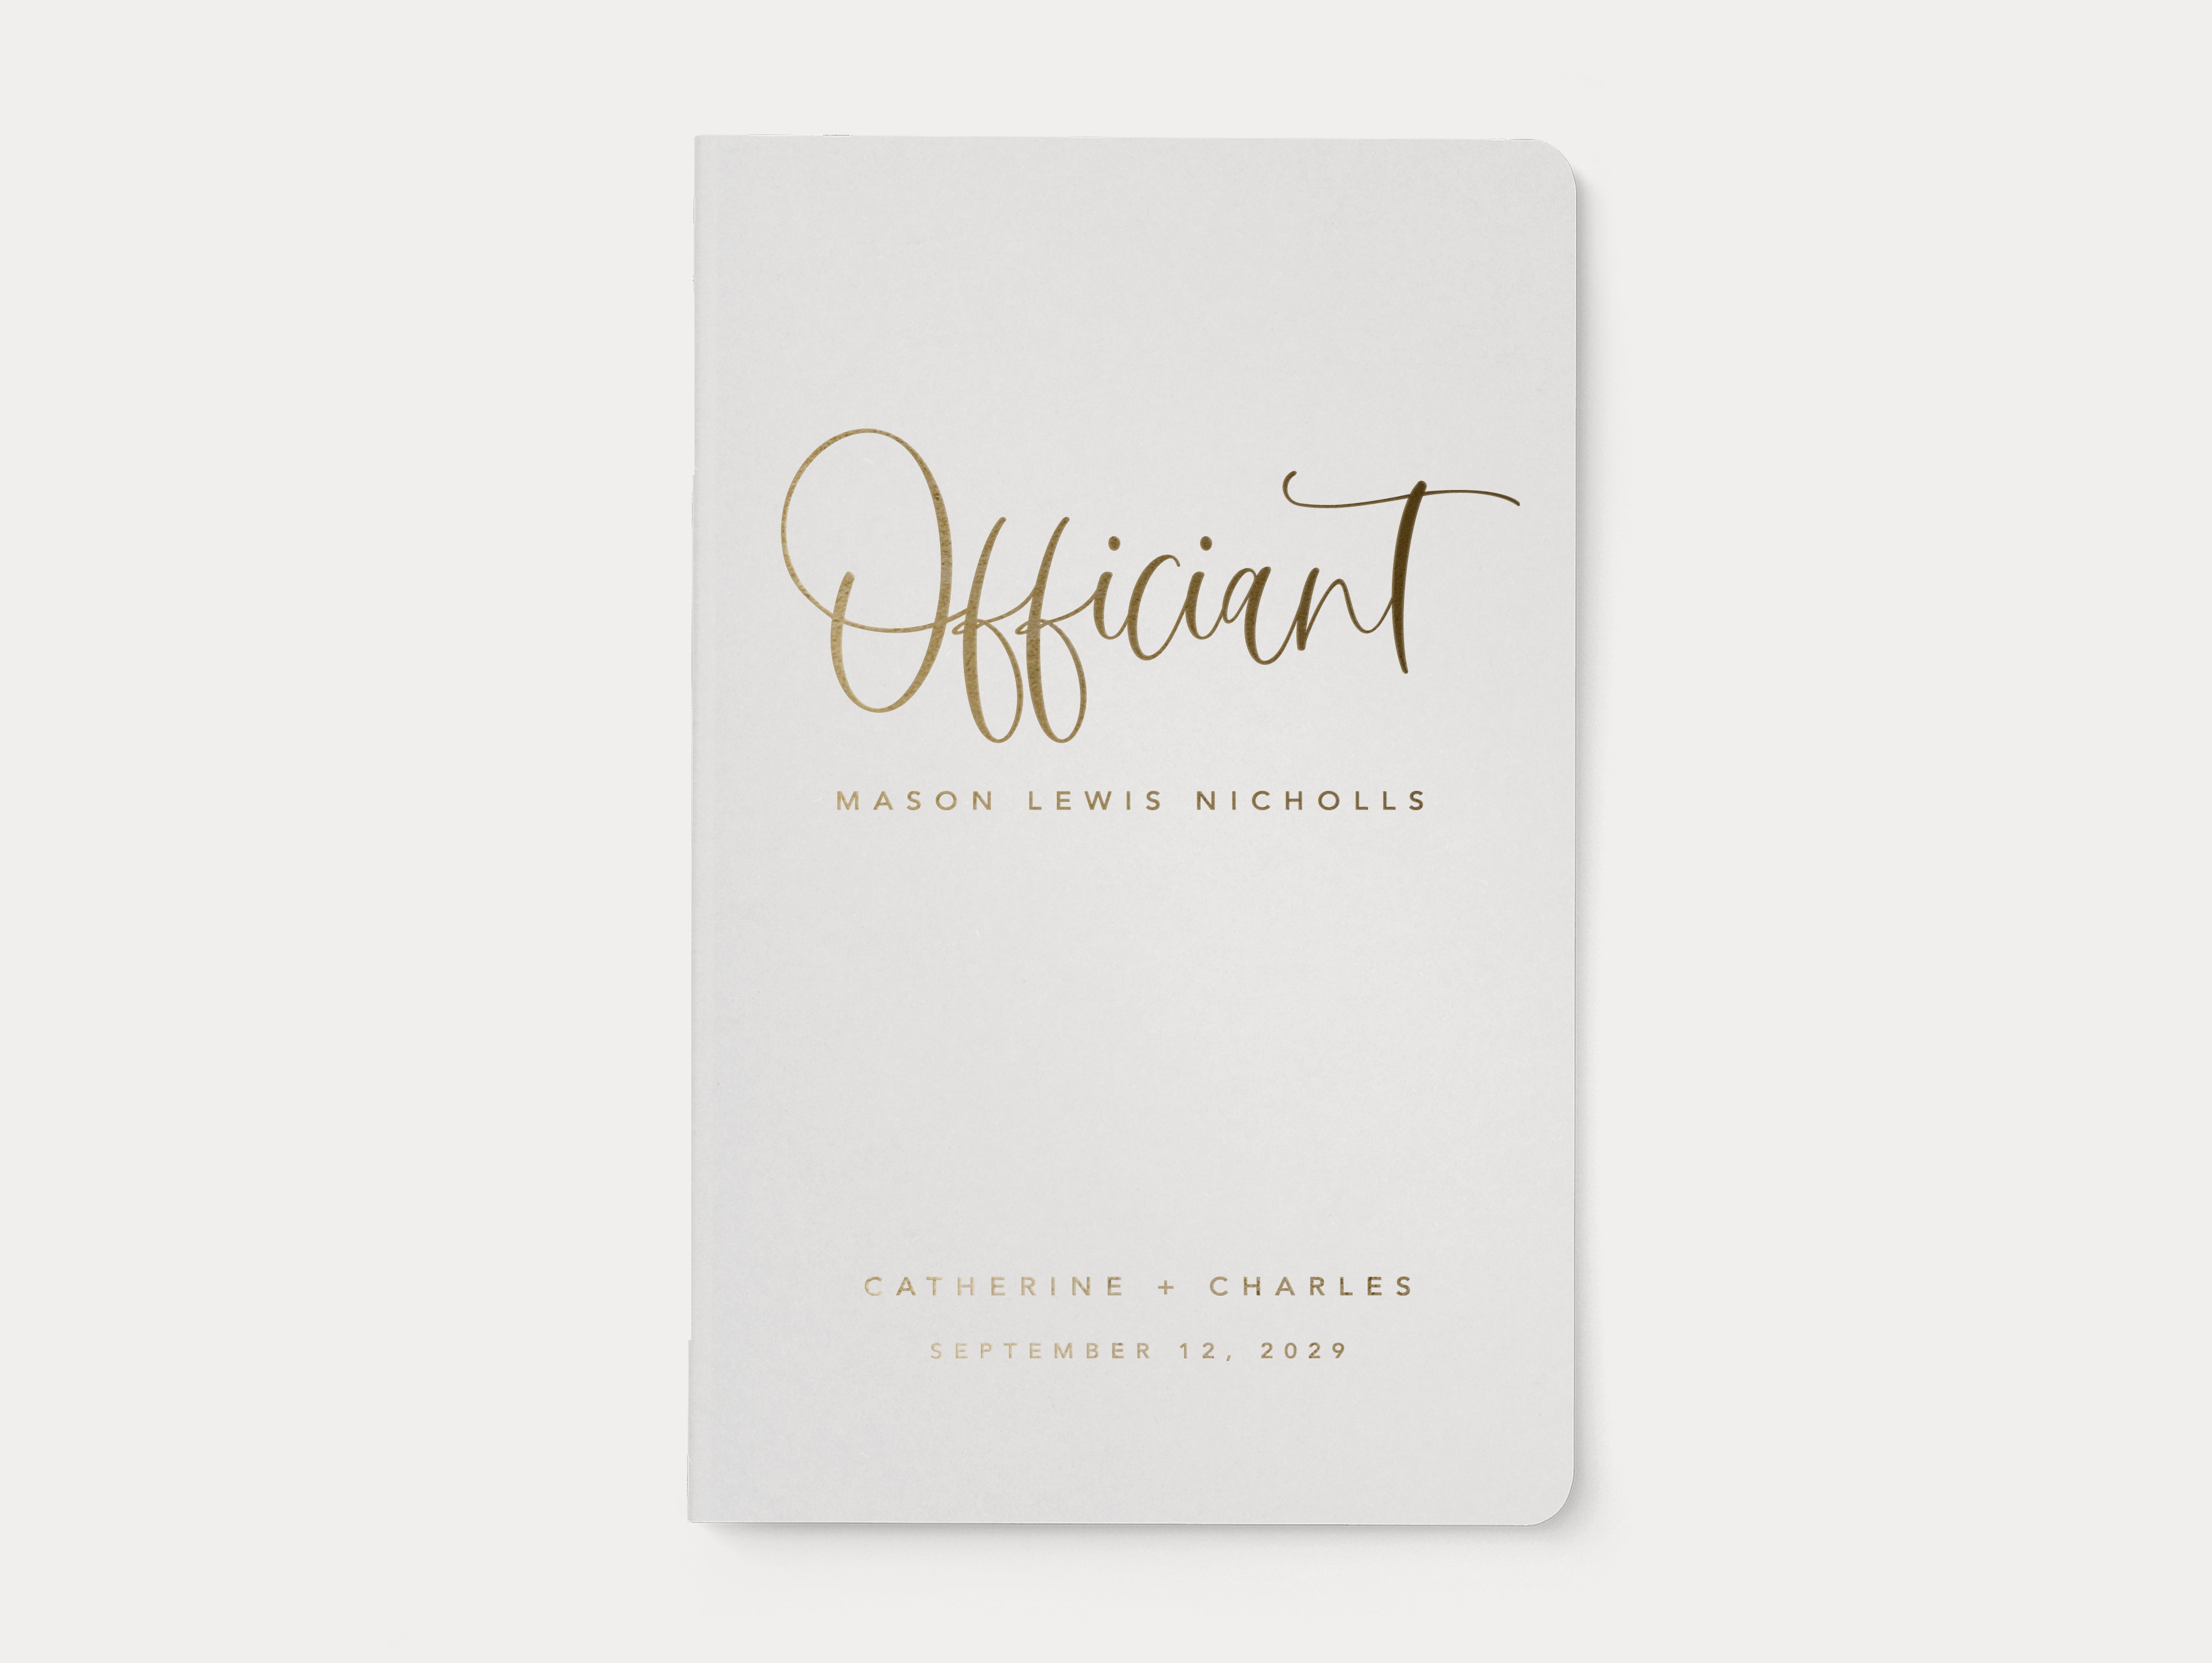 Classic wedding officiant book with white cover and gold foil text.